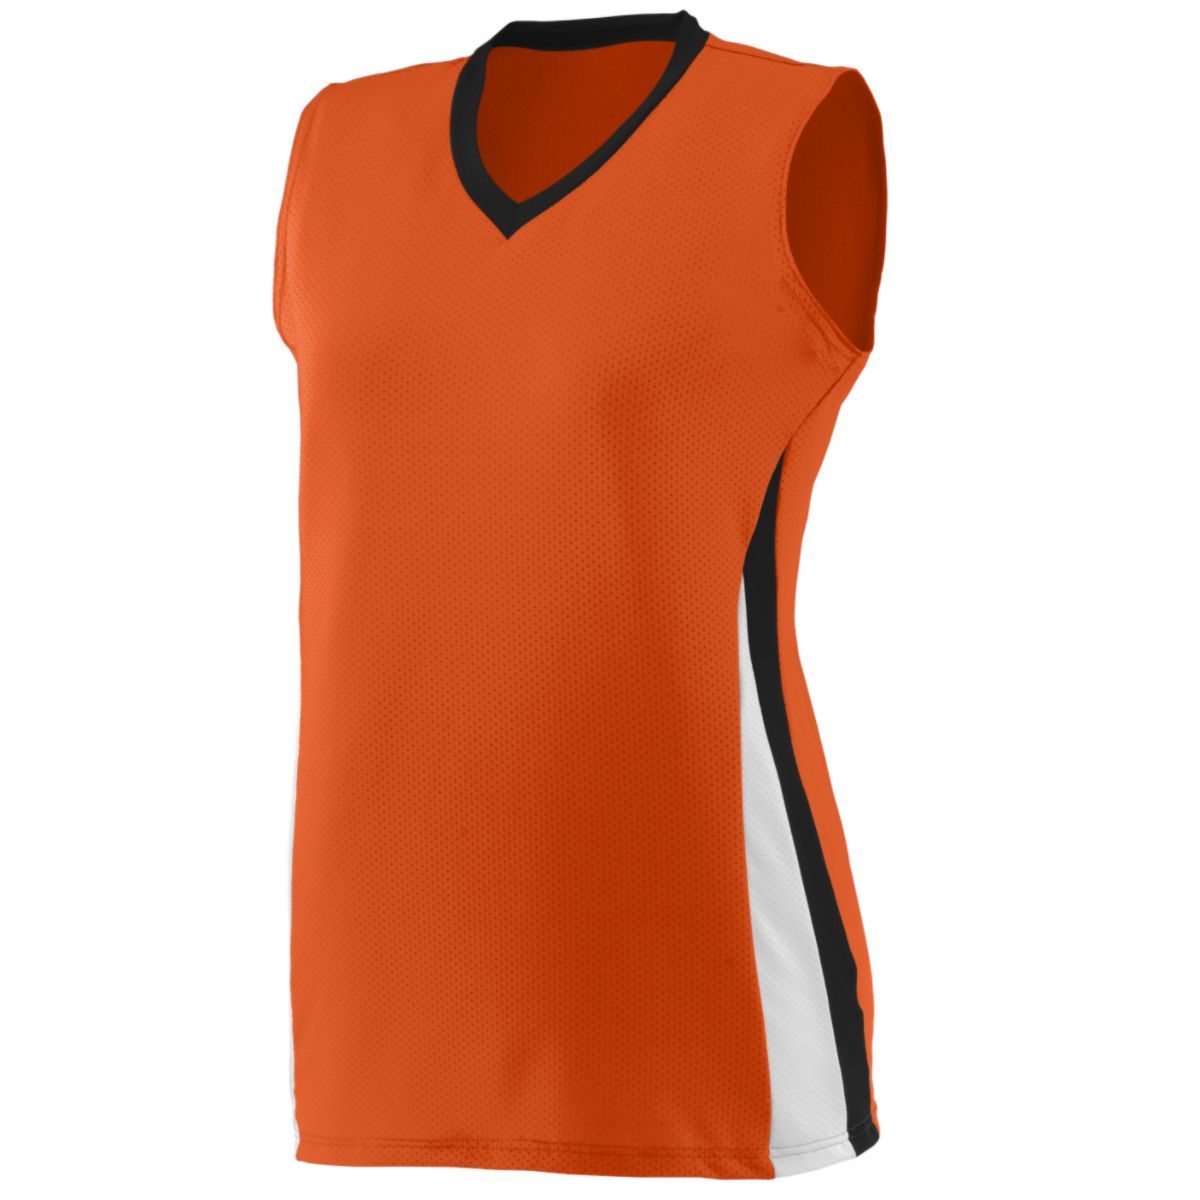 Augusta Sportswear Ladies Tornado Jersey in Orange/Black/White  -Part of the Ladies, Ladies-Jersey, Augusta-Products, Volleyball, Shirts product lines at KanaleyCreations.com